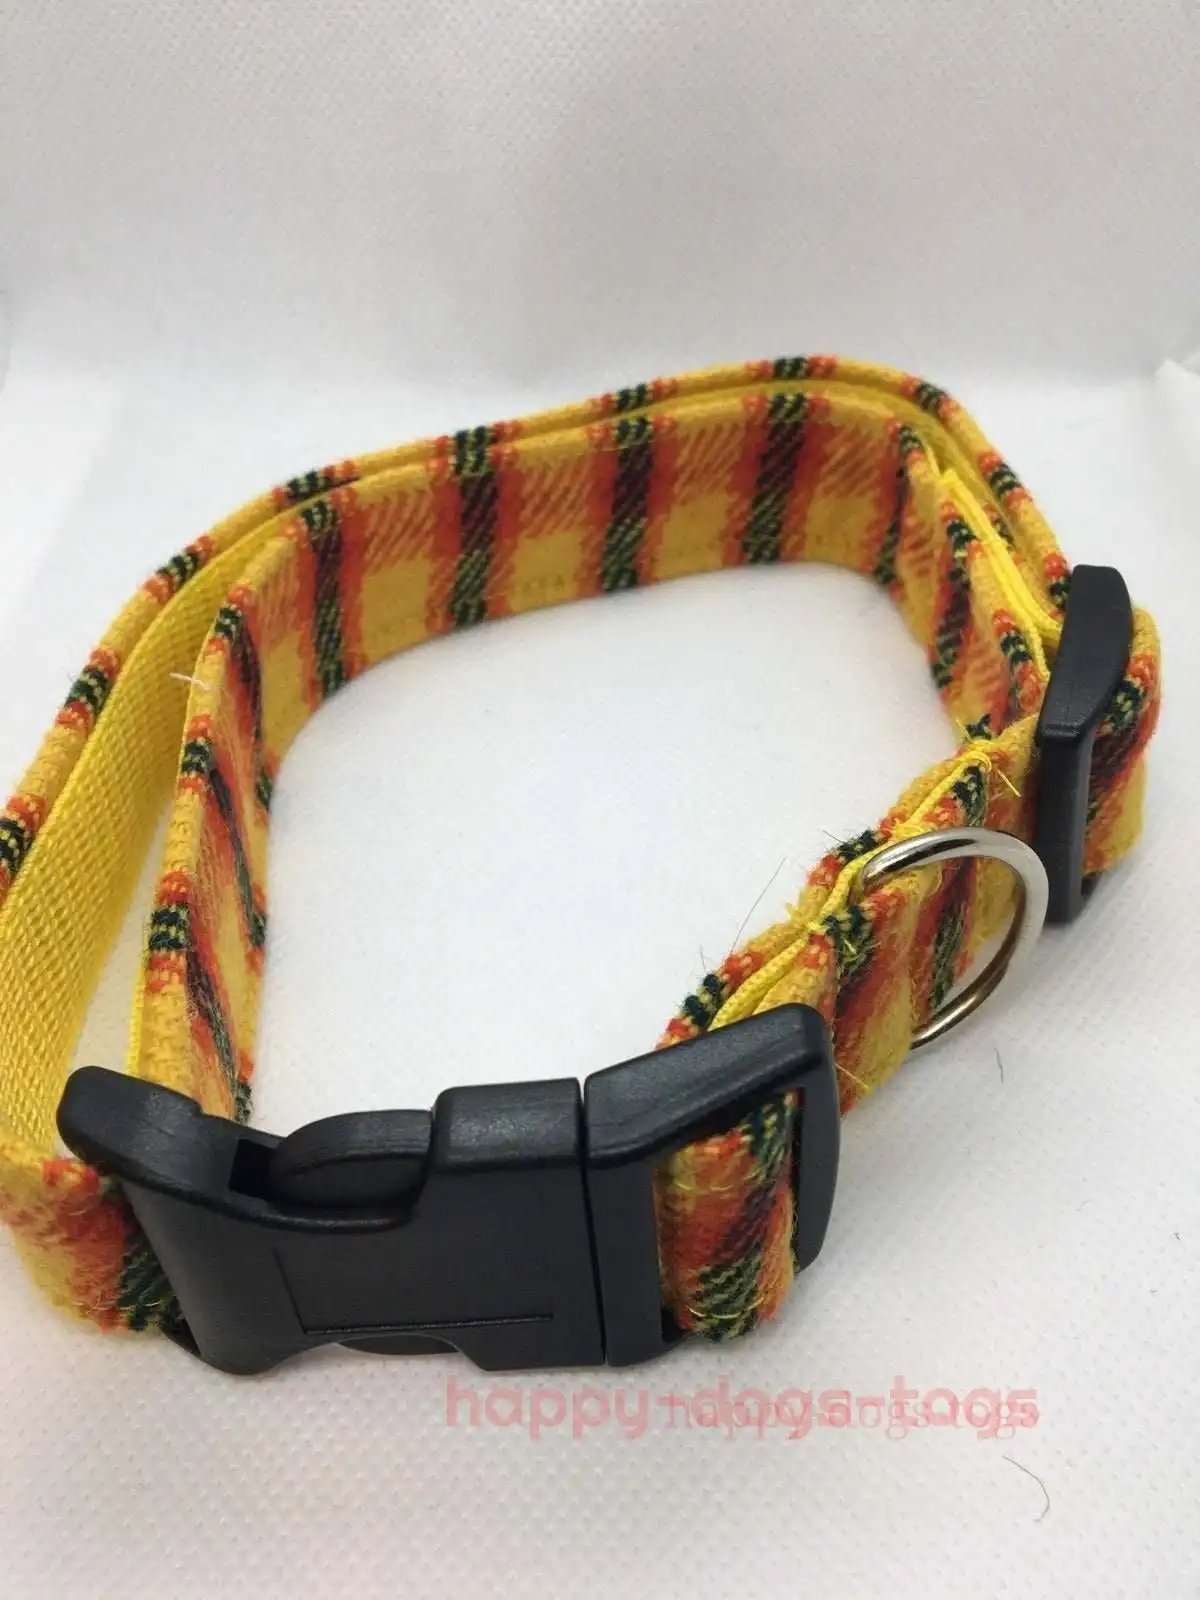 WOOL TWEED DOG  COLLAR YELLOW, RED and BLACK CHECK.